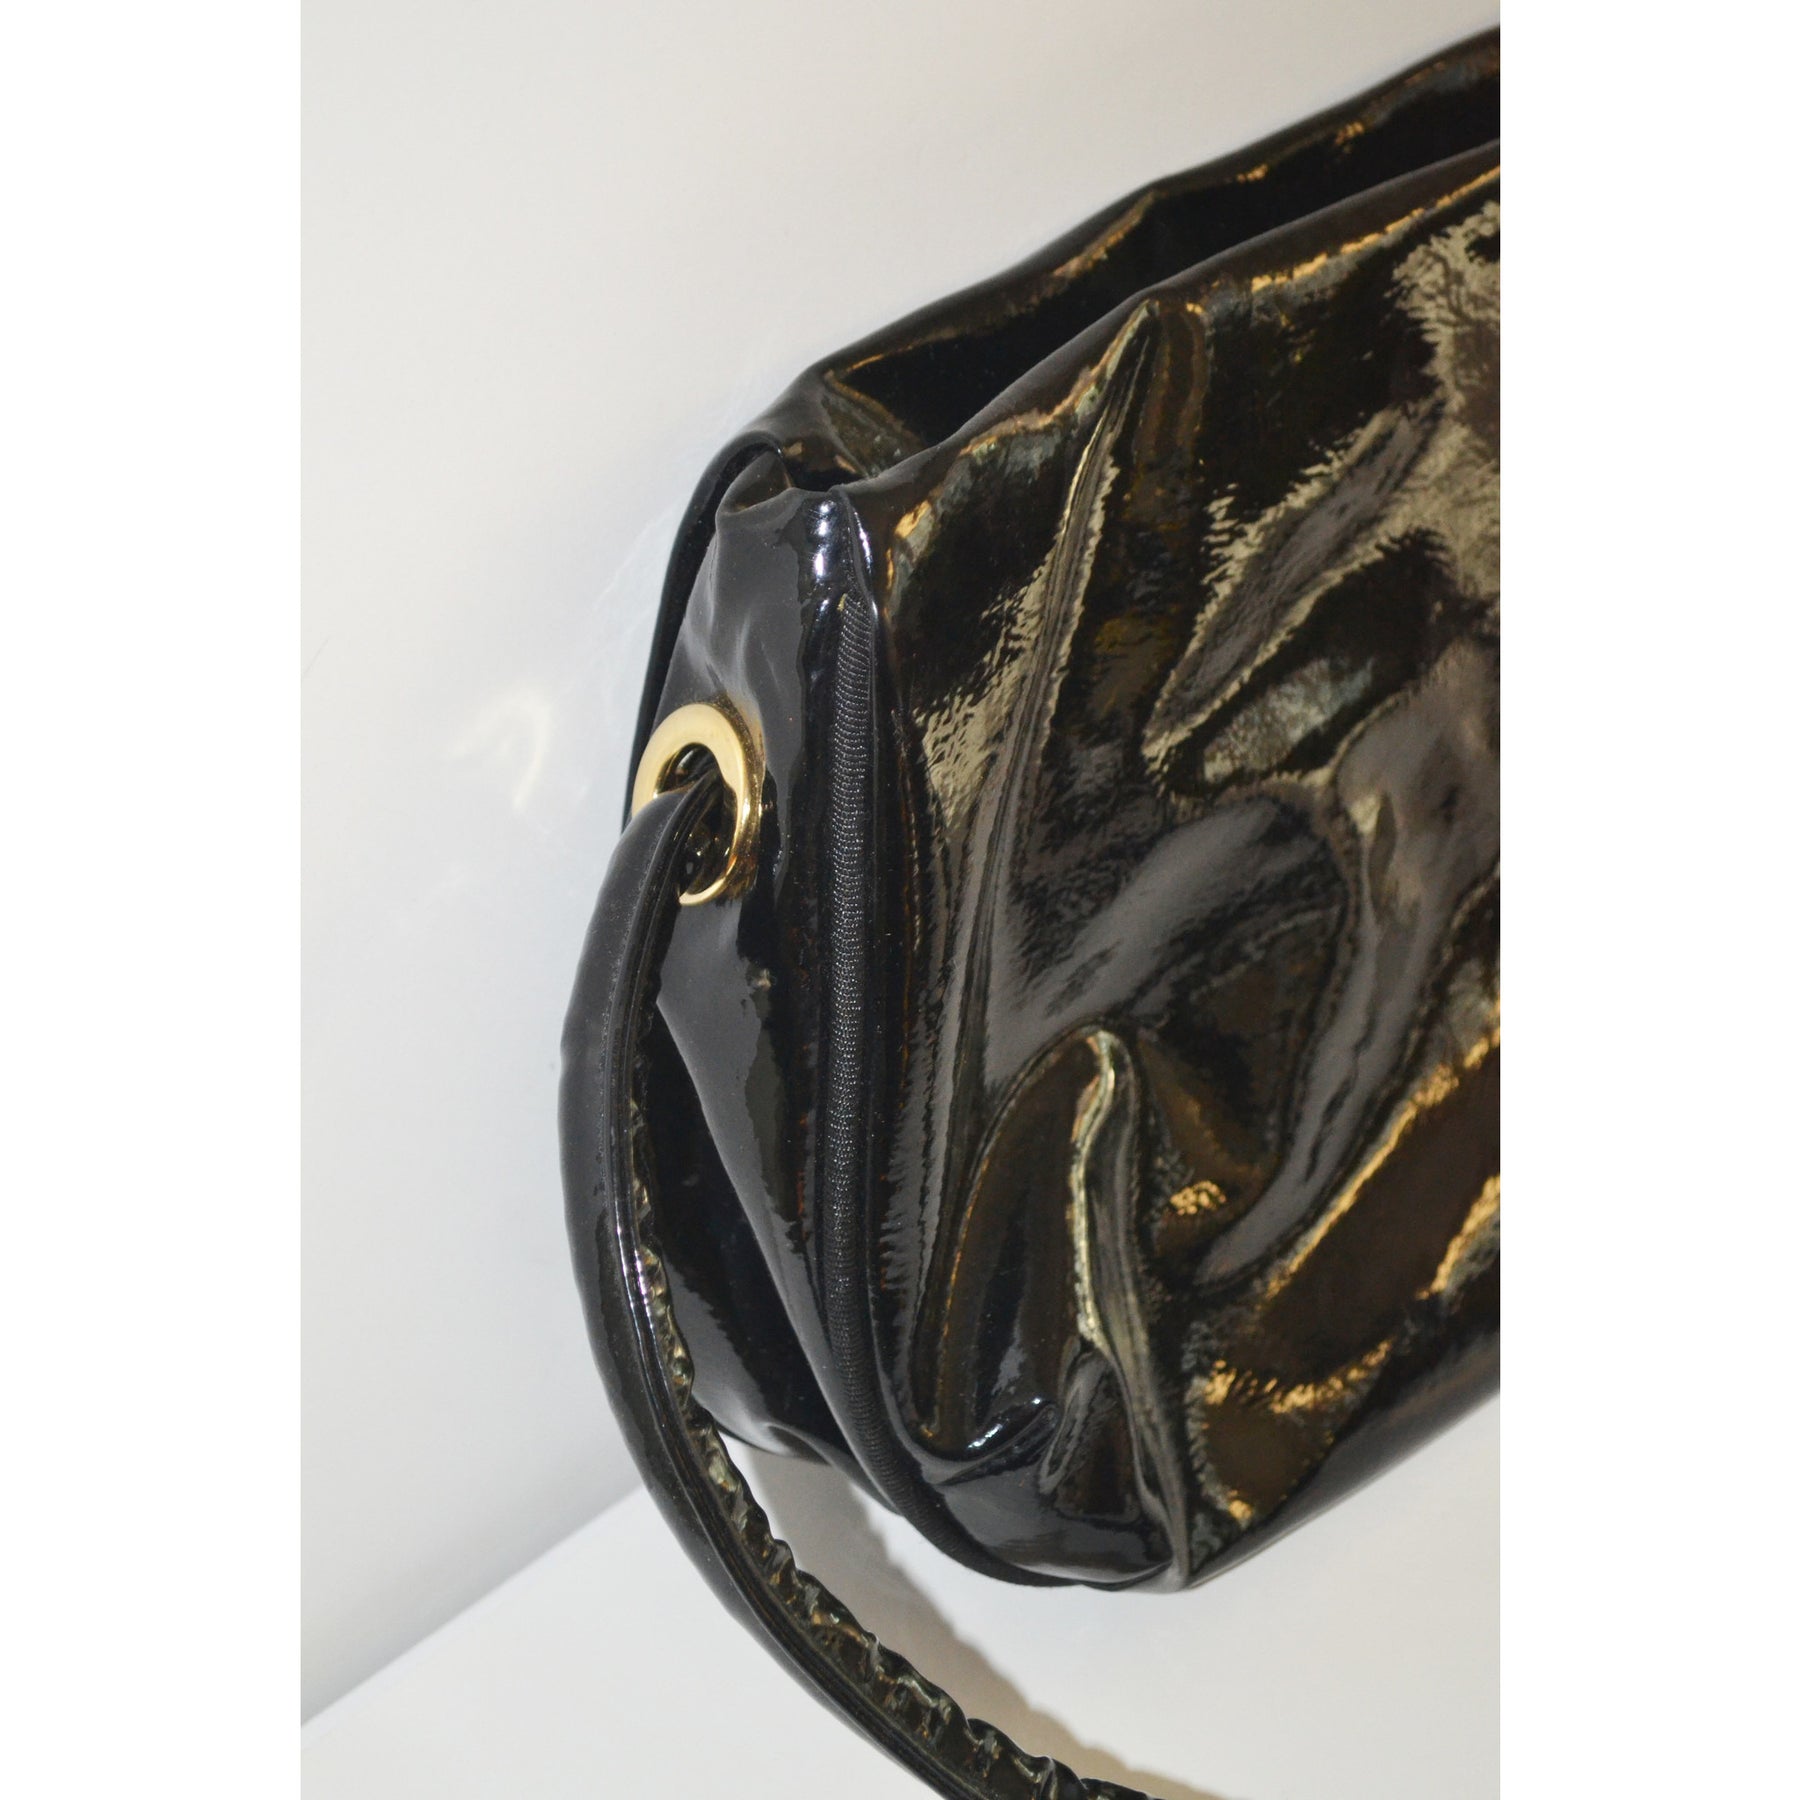 Vintage Patent Leather Licorice Handle Purse By Empress – Quirky Finds